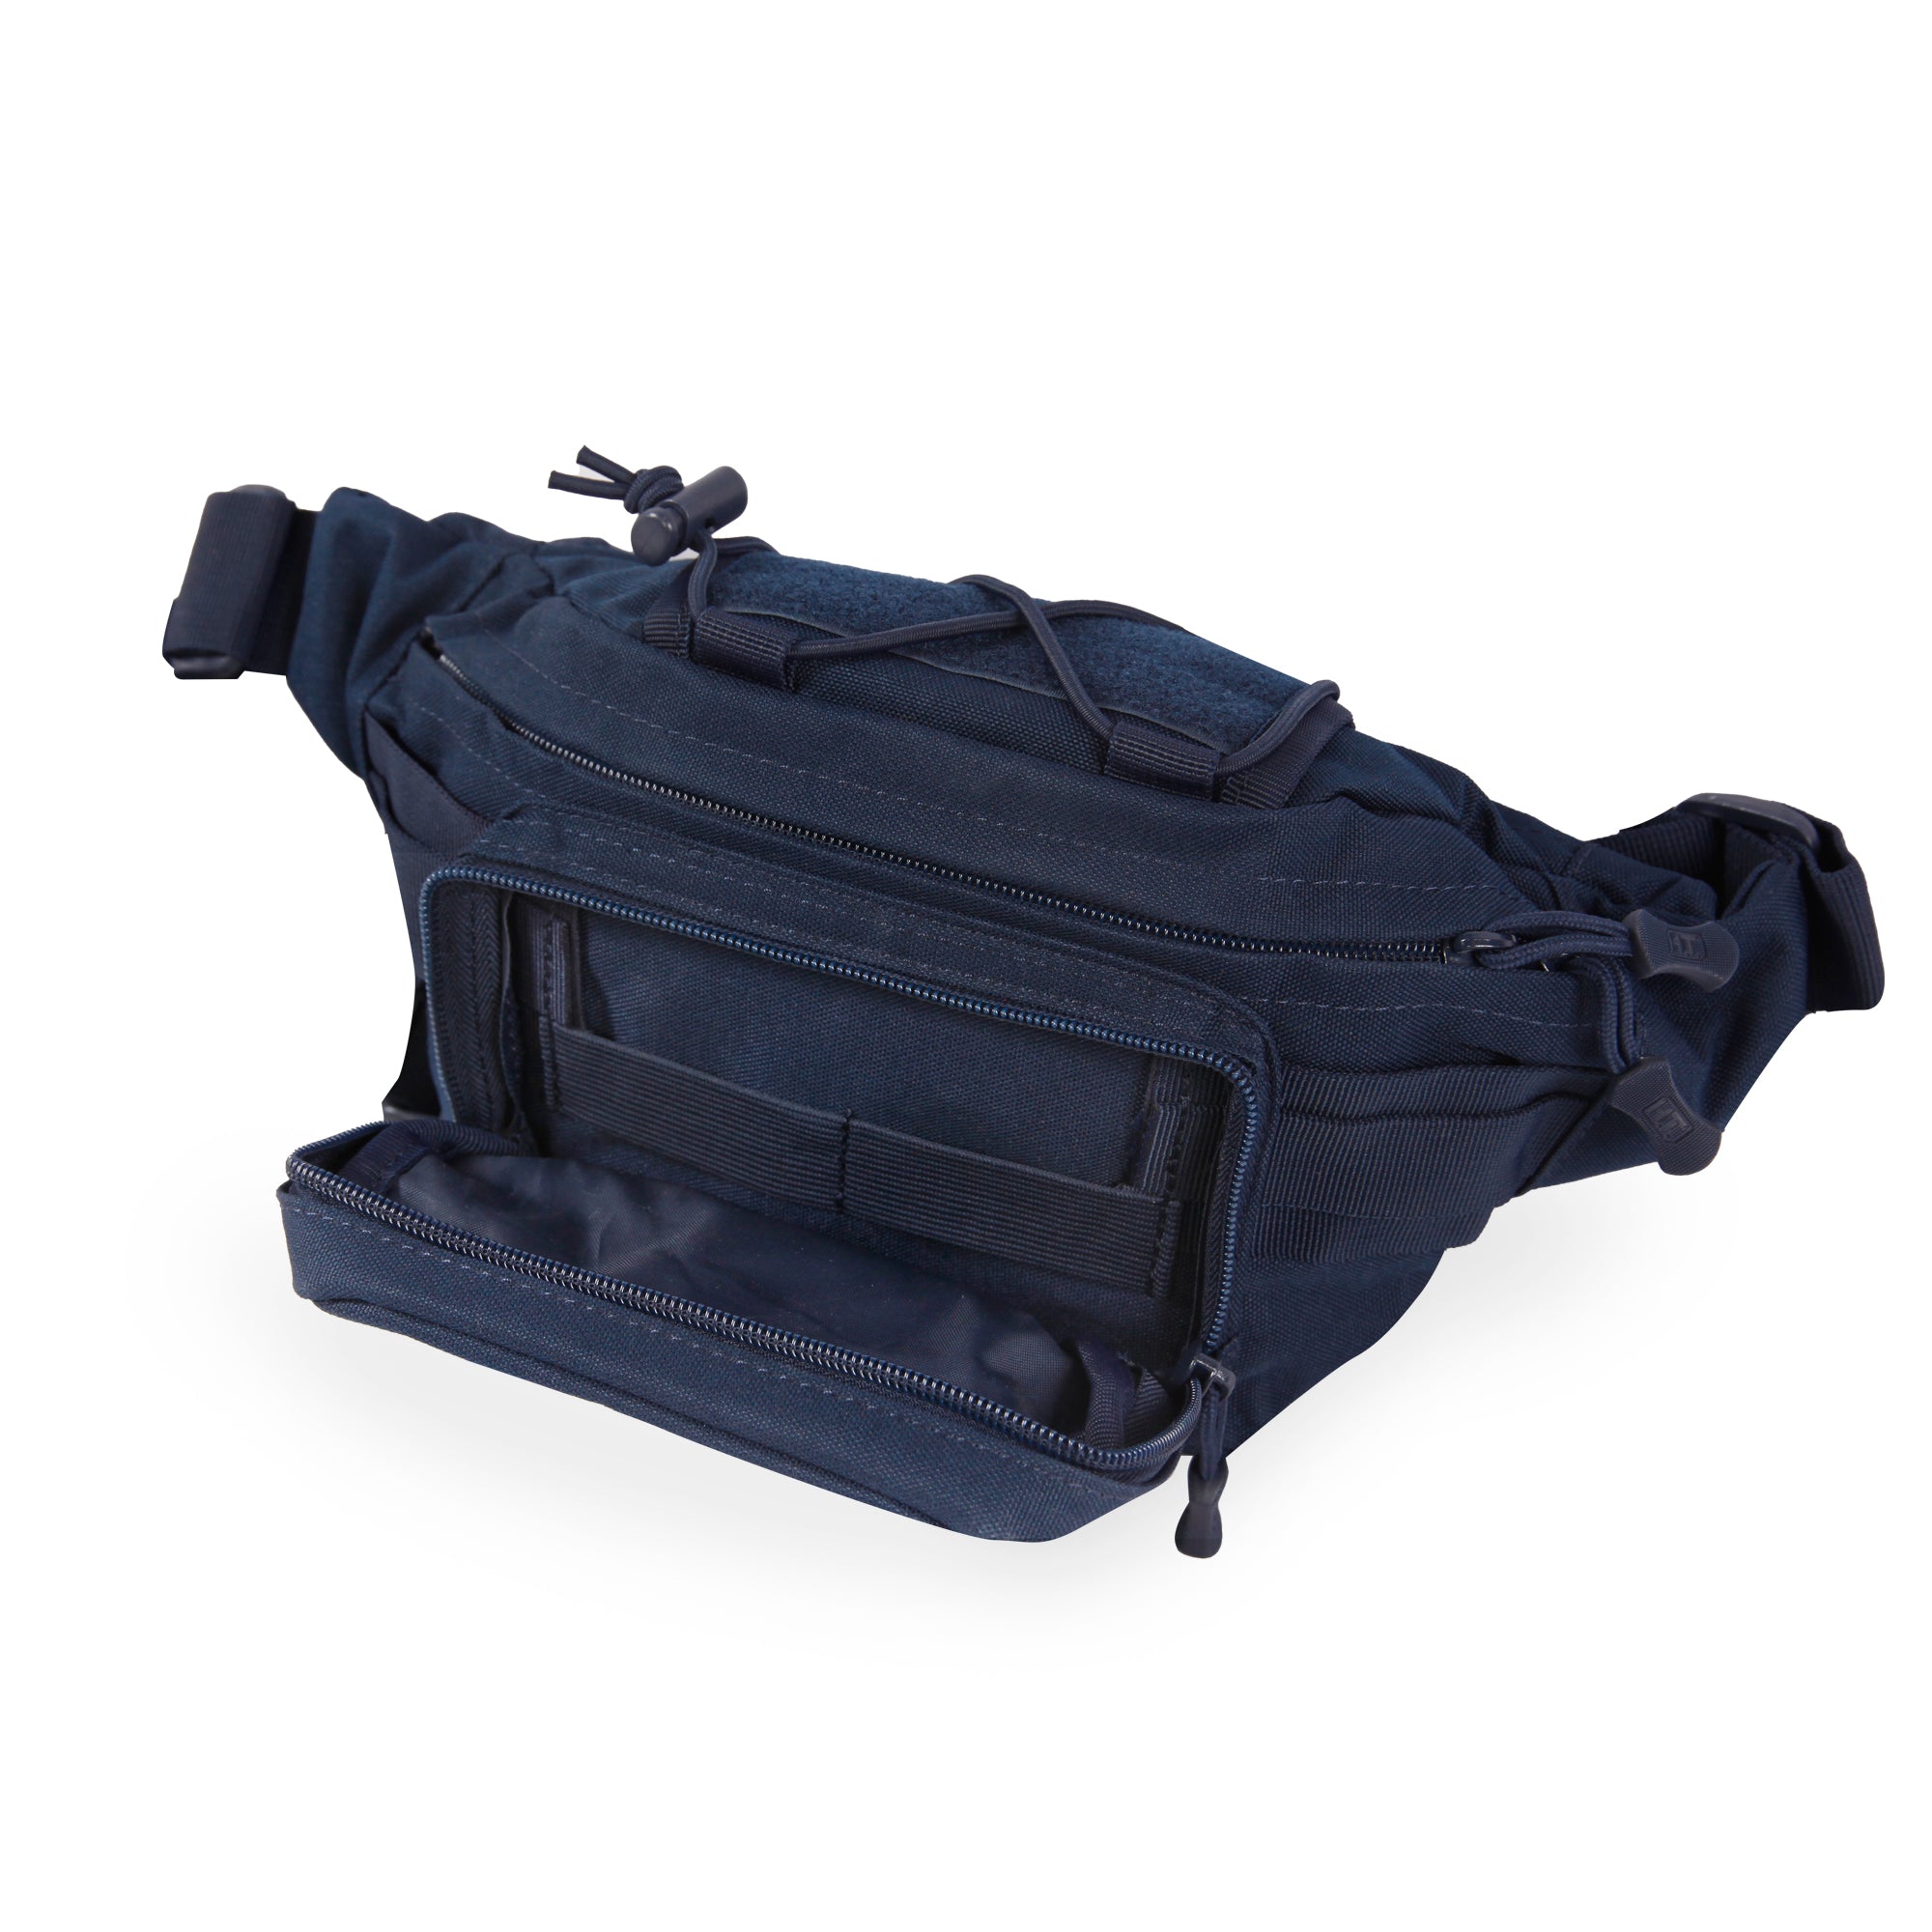 Mobility Waist Pack